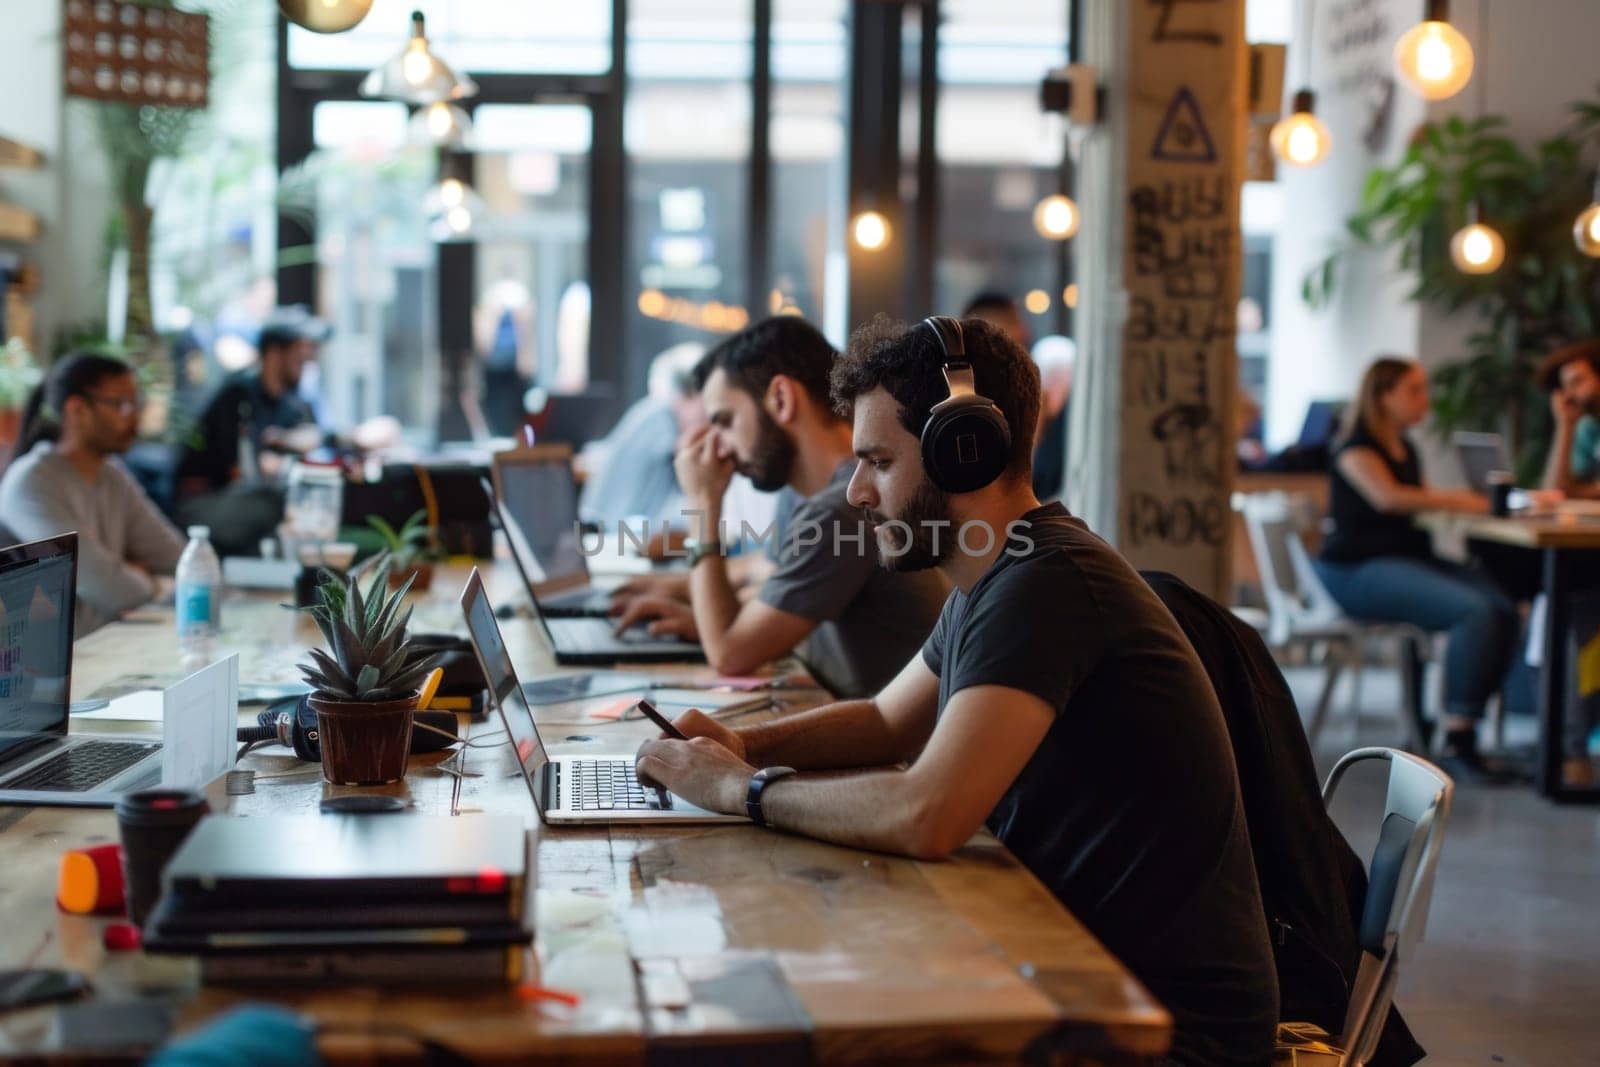 Freelancers engrossed in their work in a coworking open space, using laptops and notebooks.